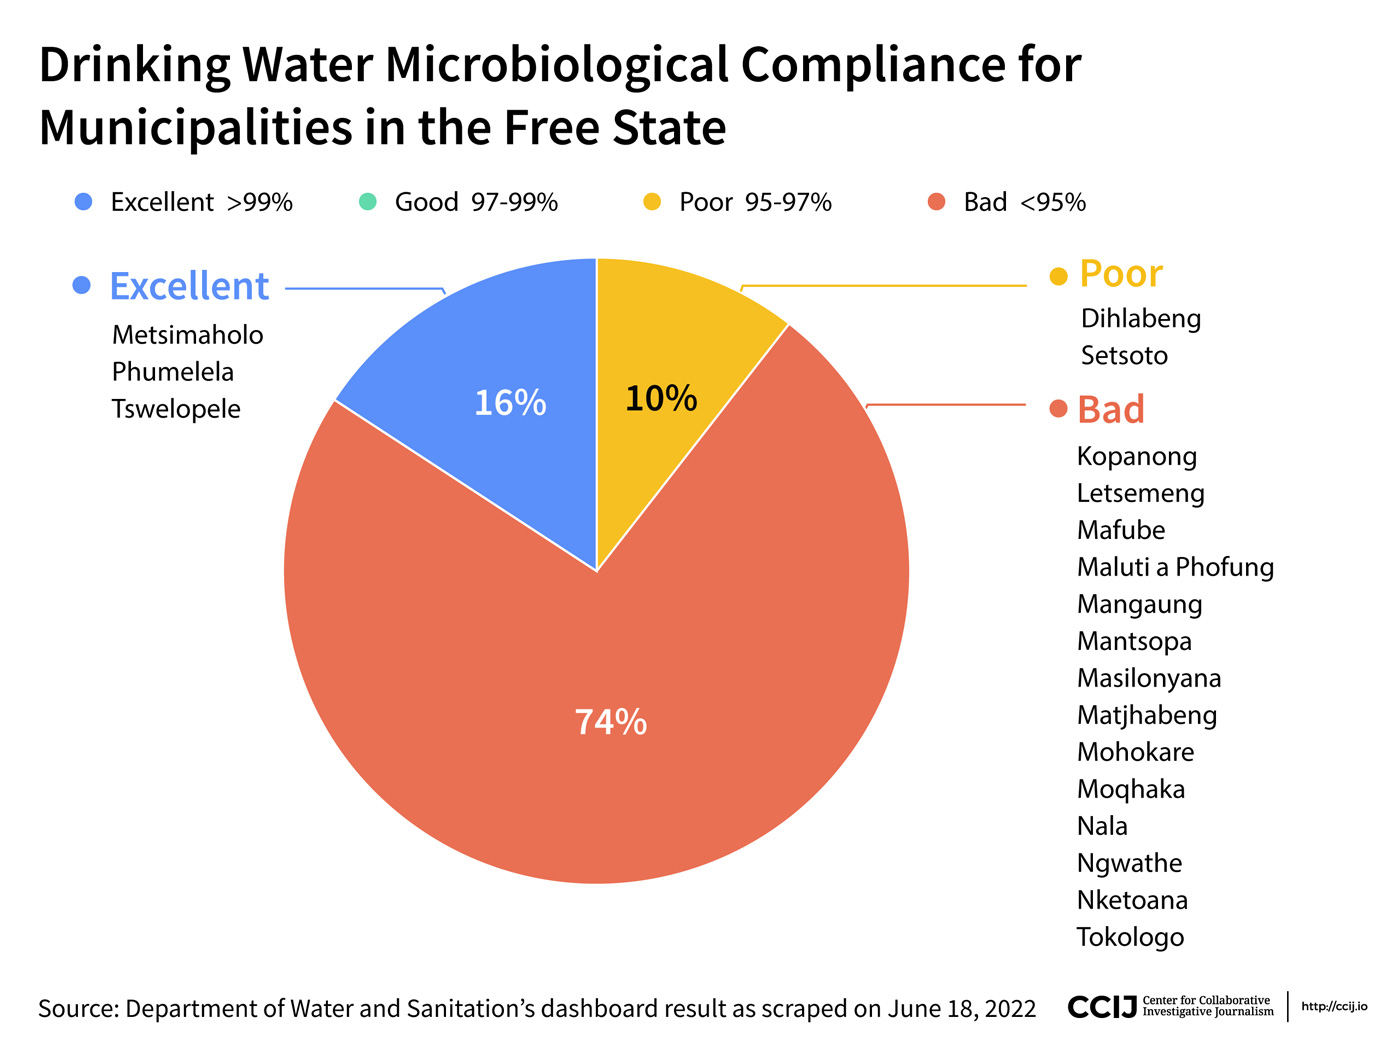 Drinking Water Microbiological Compliance for Municipalities in the Free State